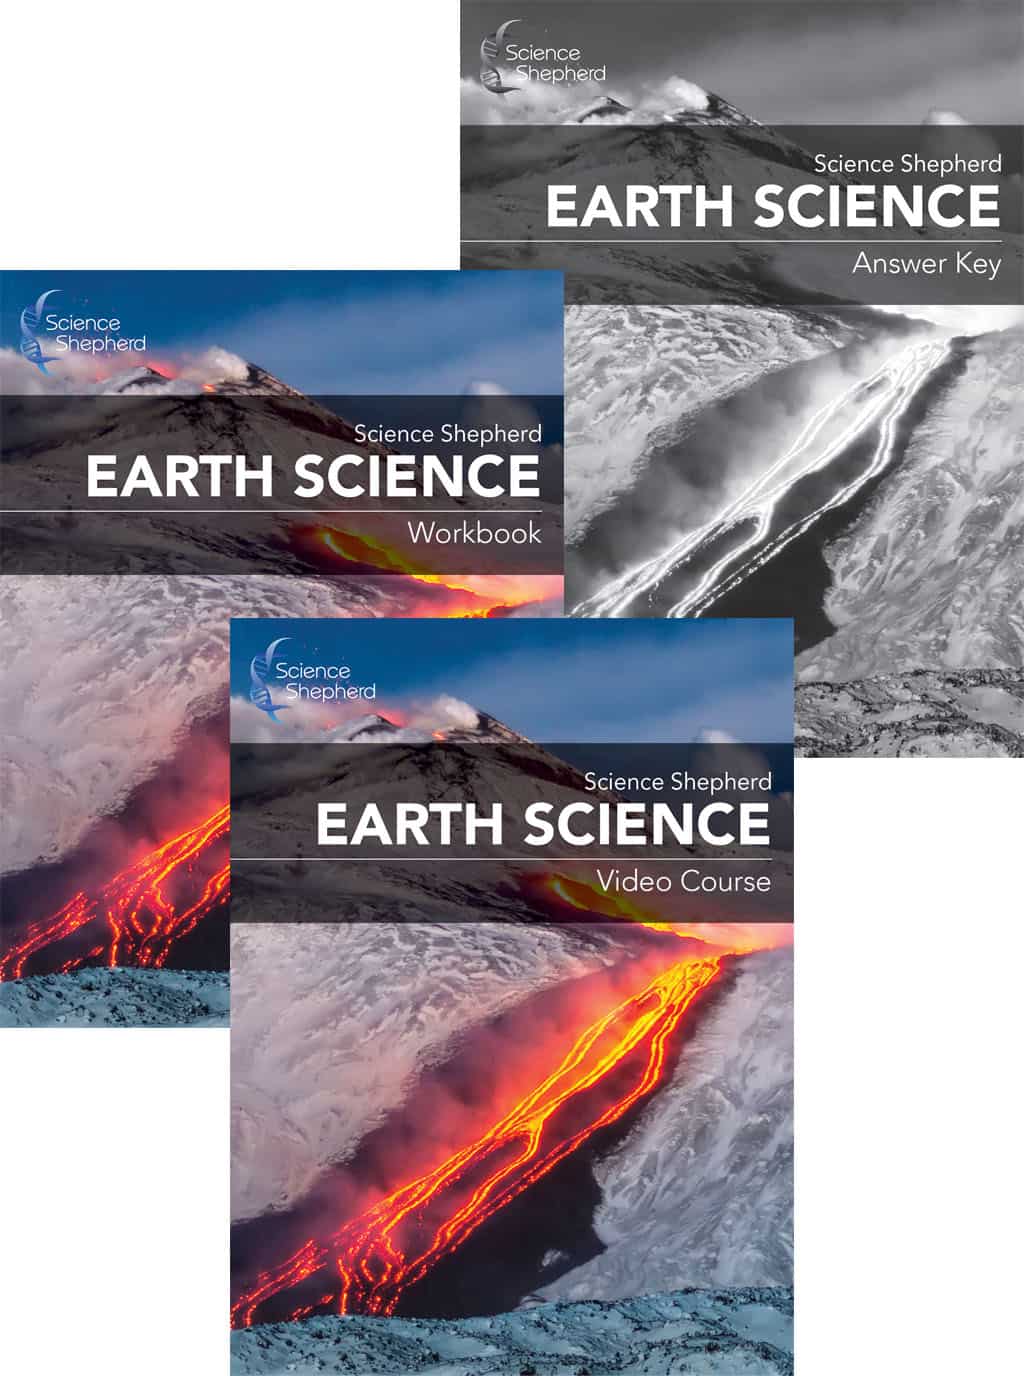 Earth Science homeschool curriculum bundle video and book covers of a volcano erupting